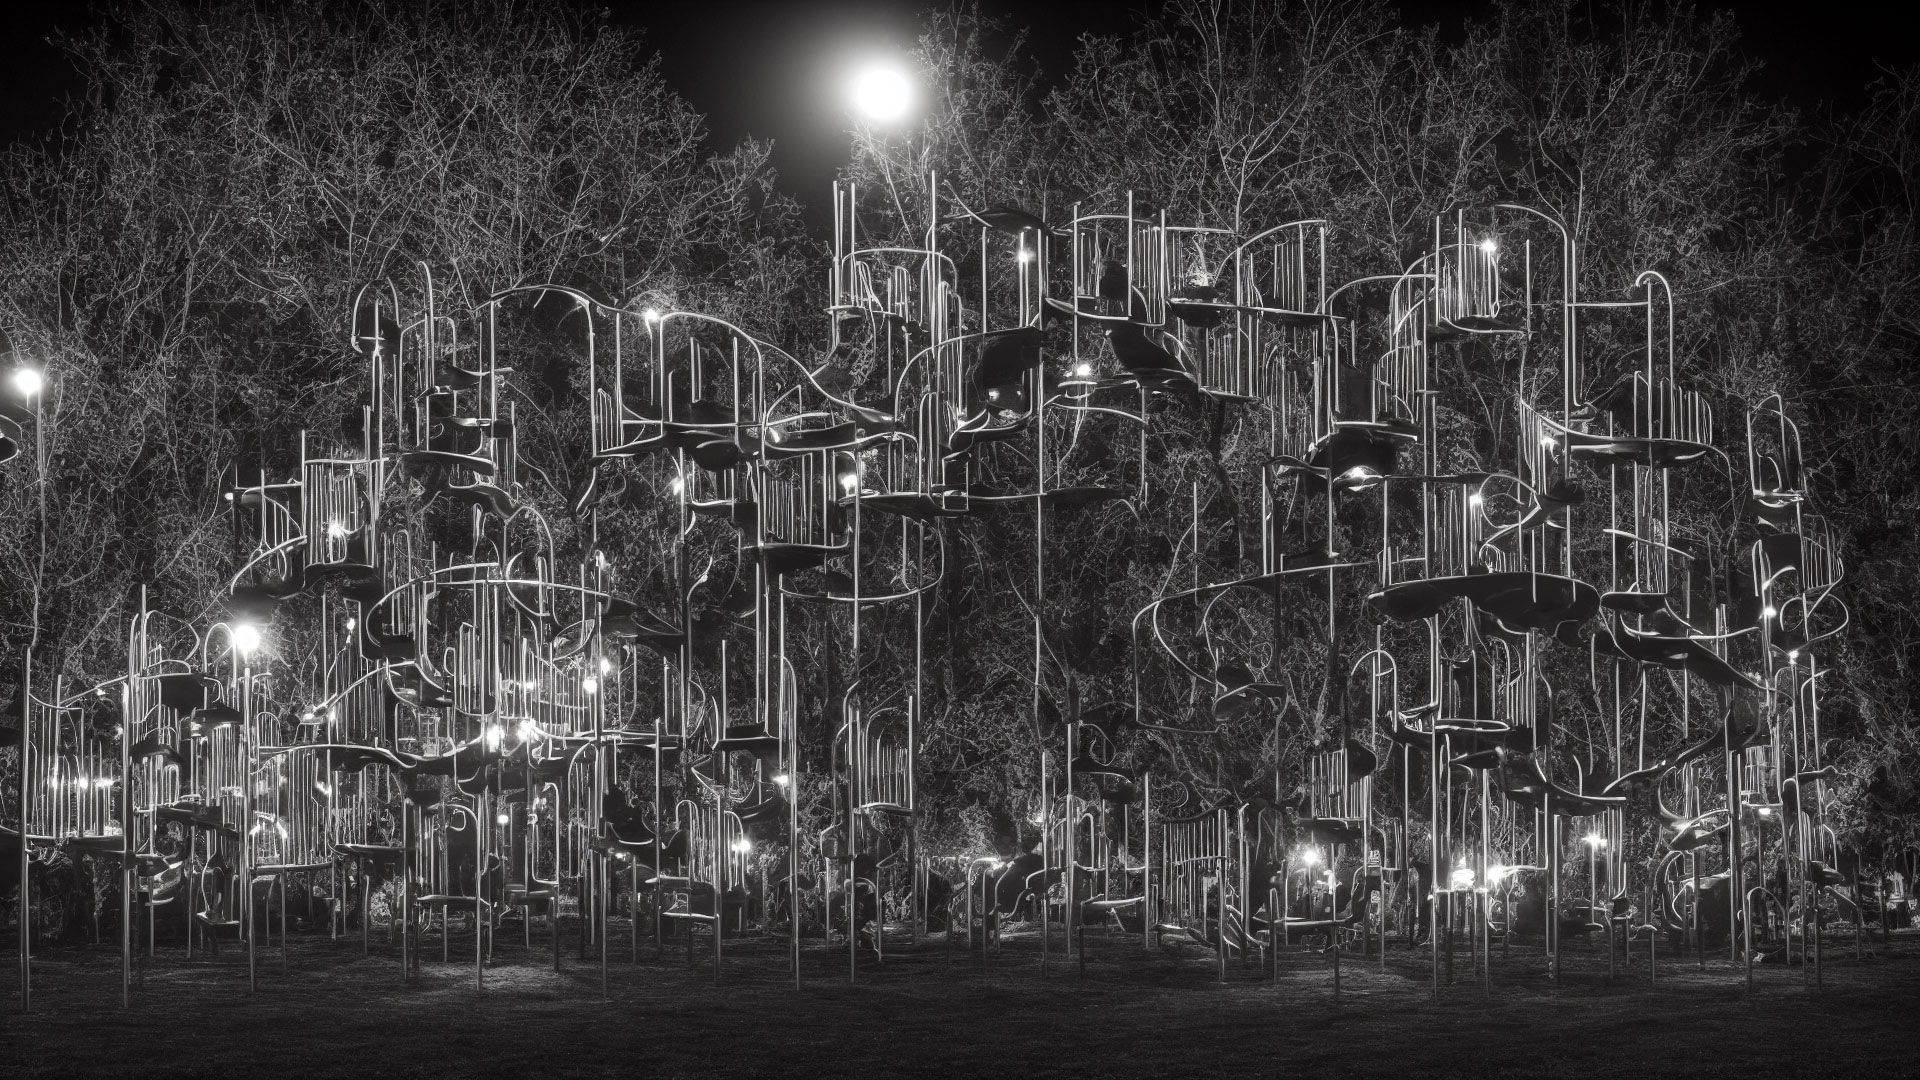 A playground at night, spooky